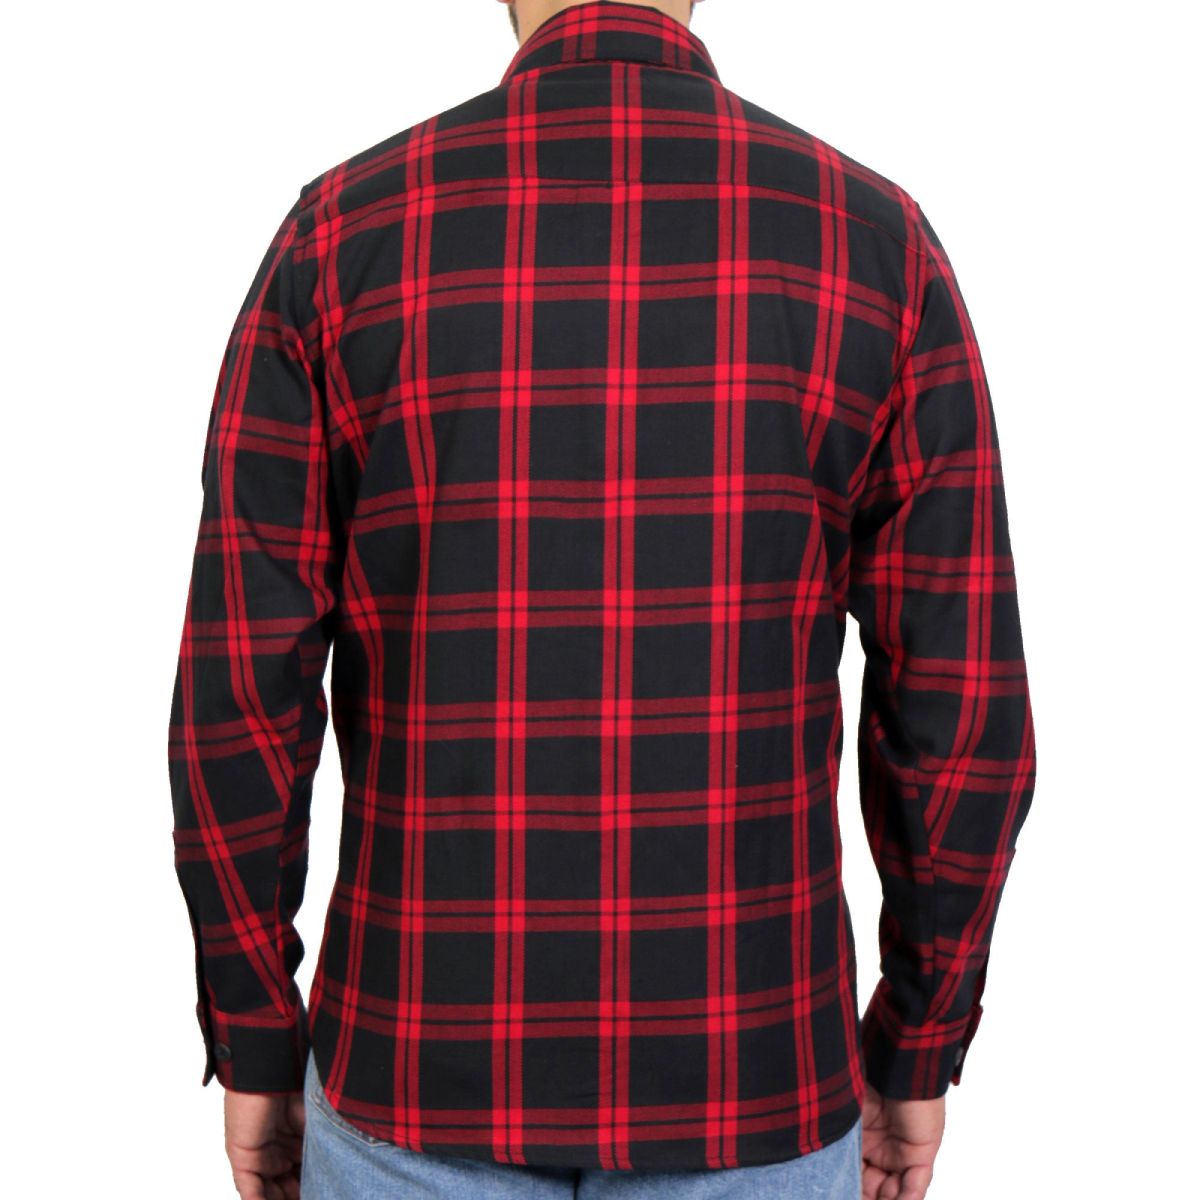 Hot Leathers FLM2021 Men's 'Red and Black' Flannel Long Sleeve Shirt